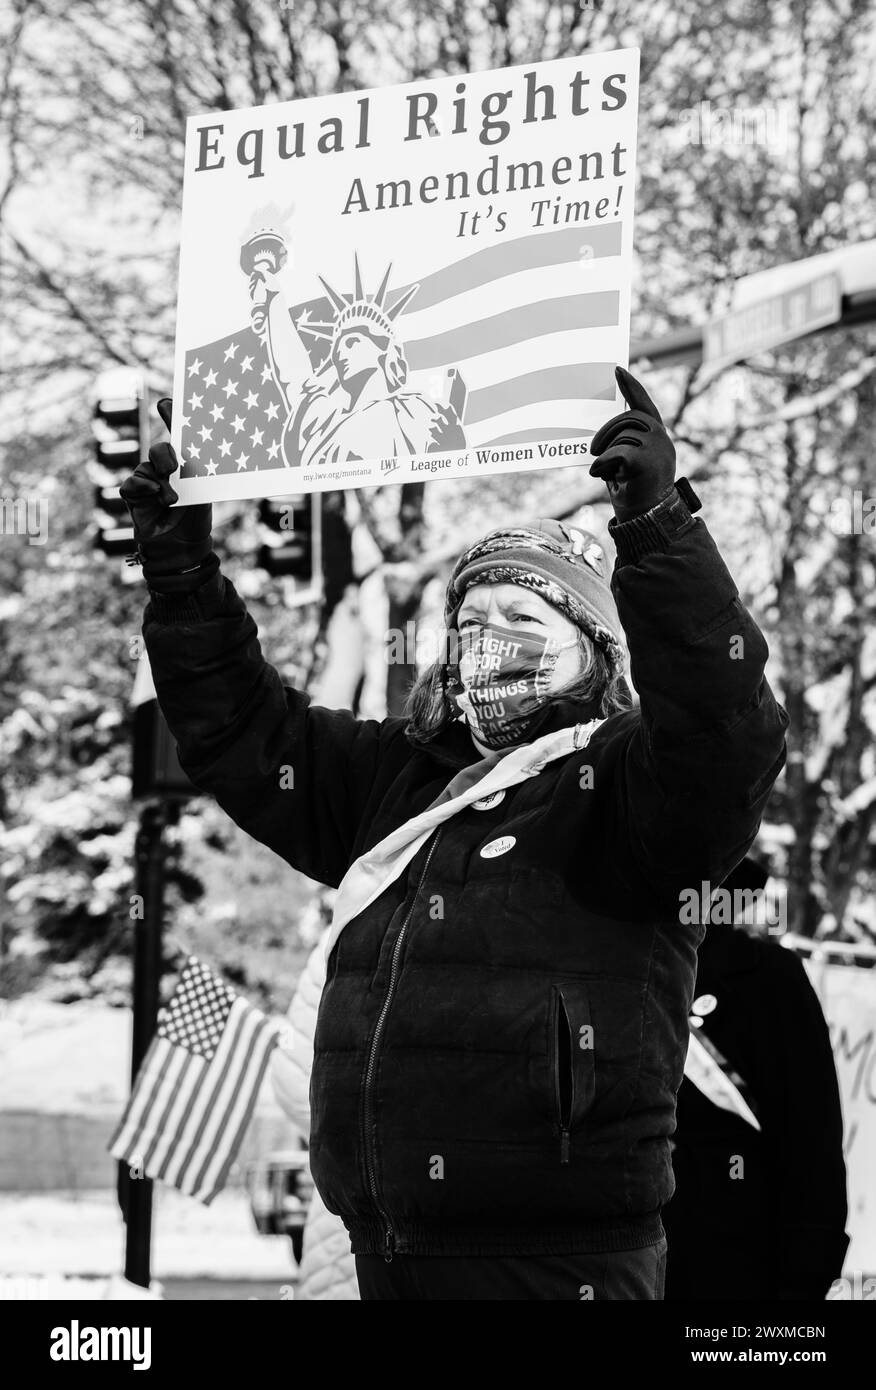 Activist for women voting rights on a winter day in Missoula, Montana Stock Photo